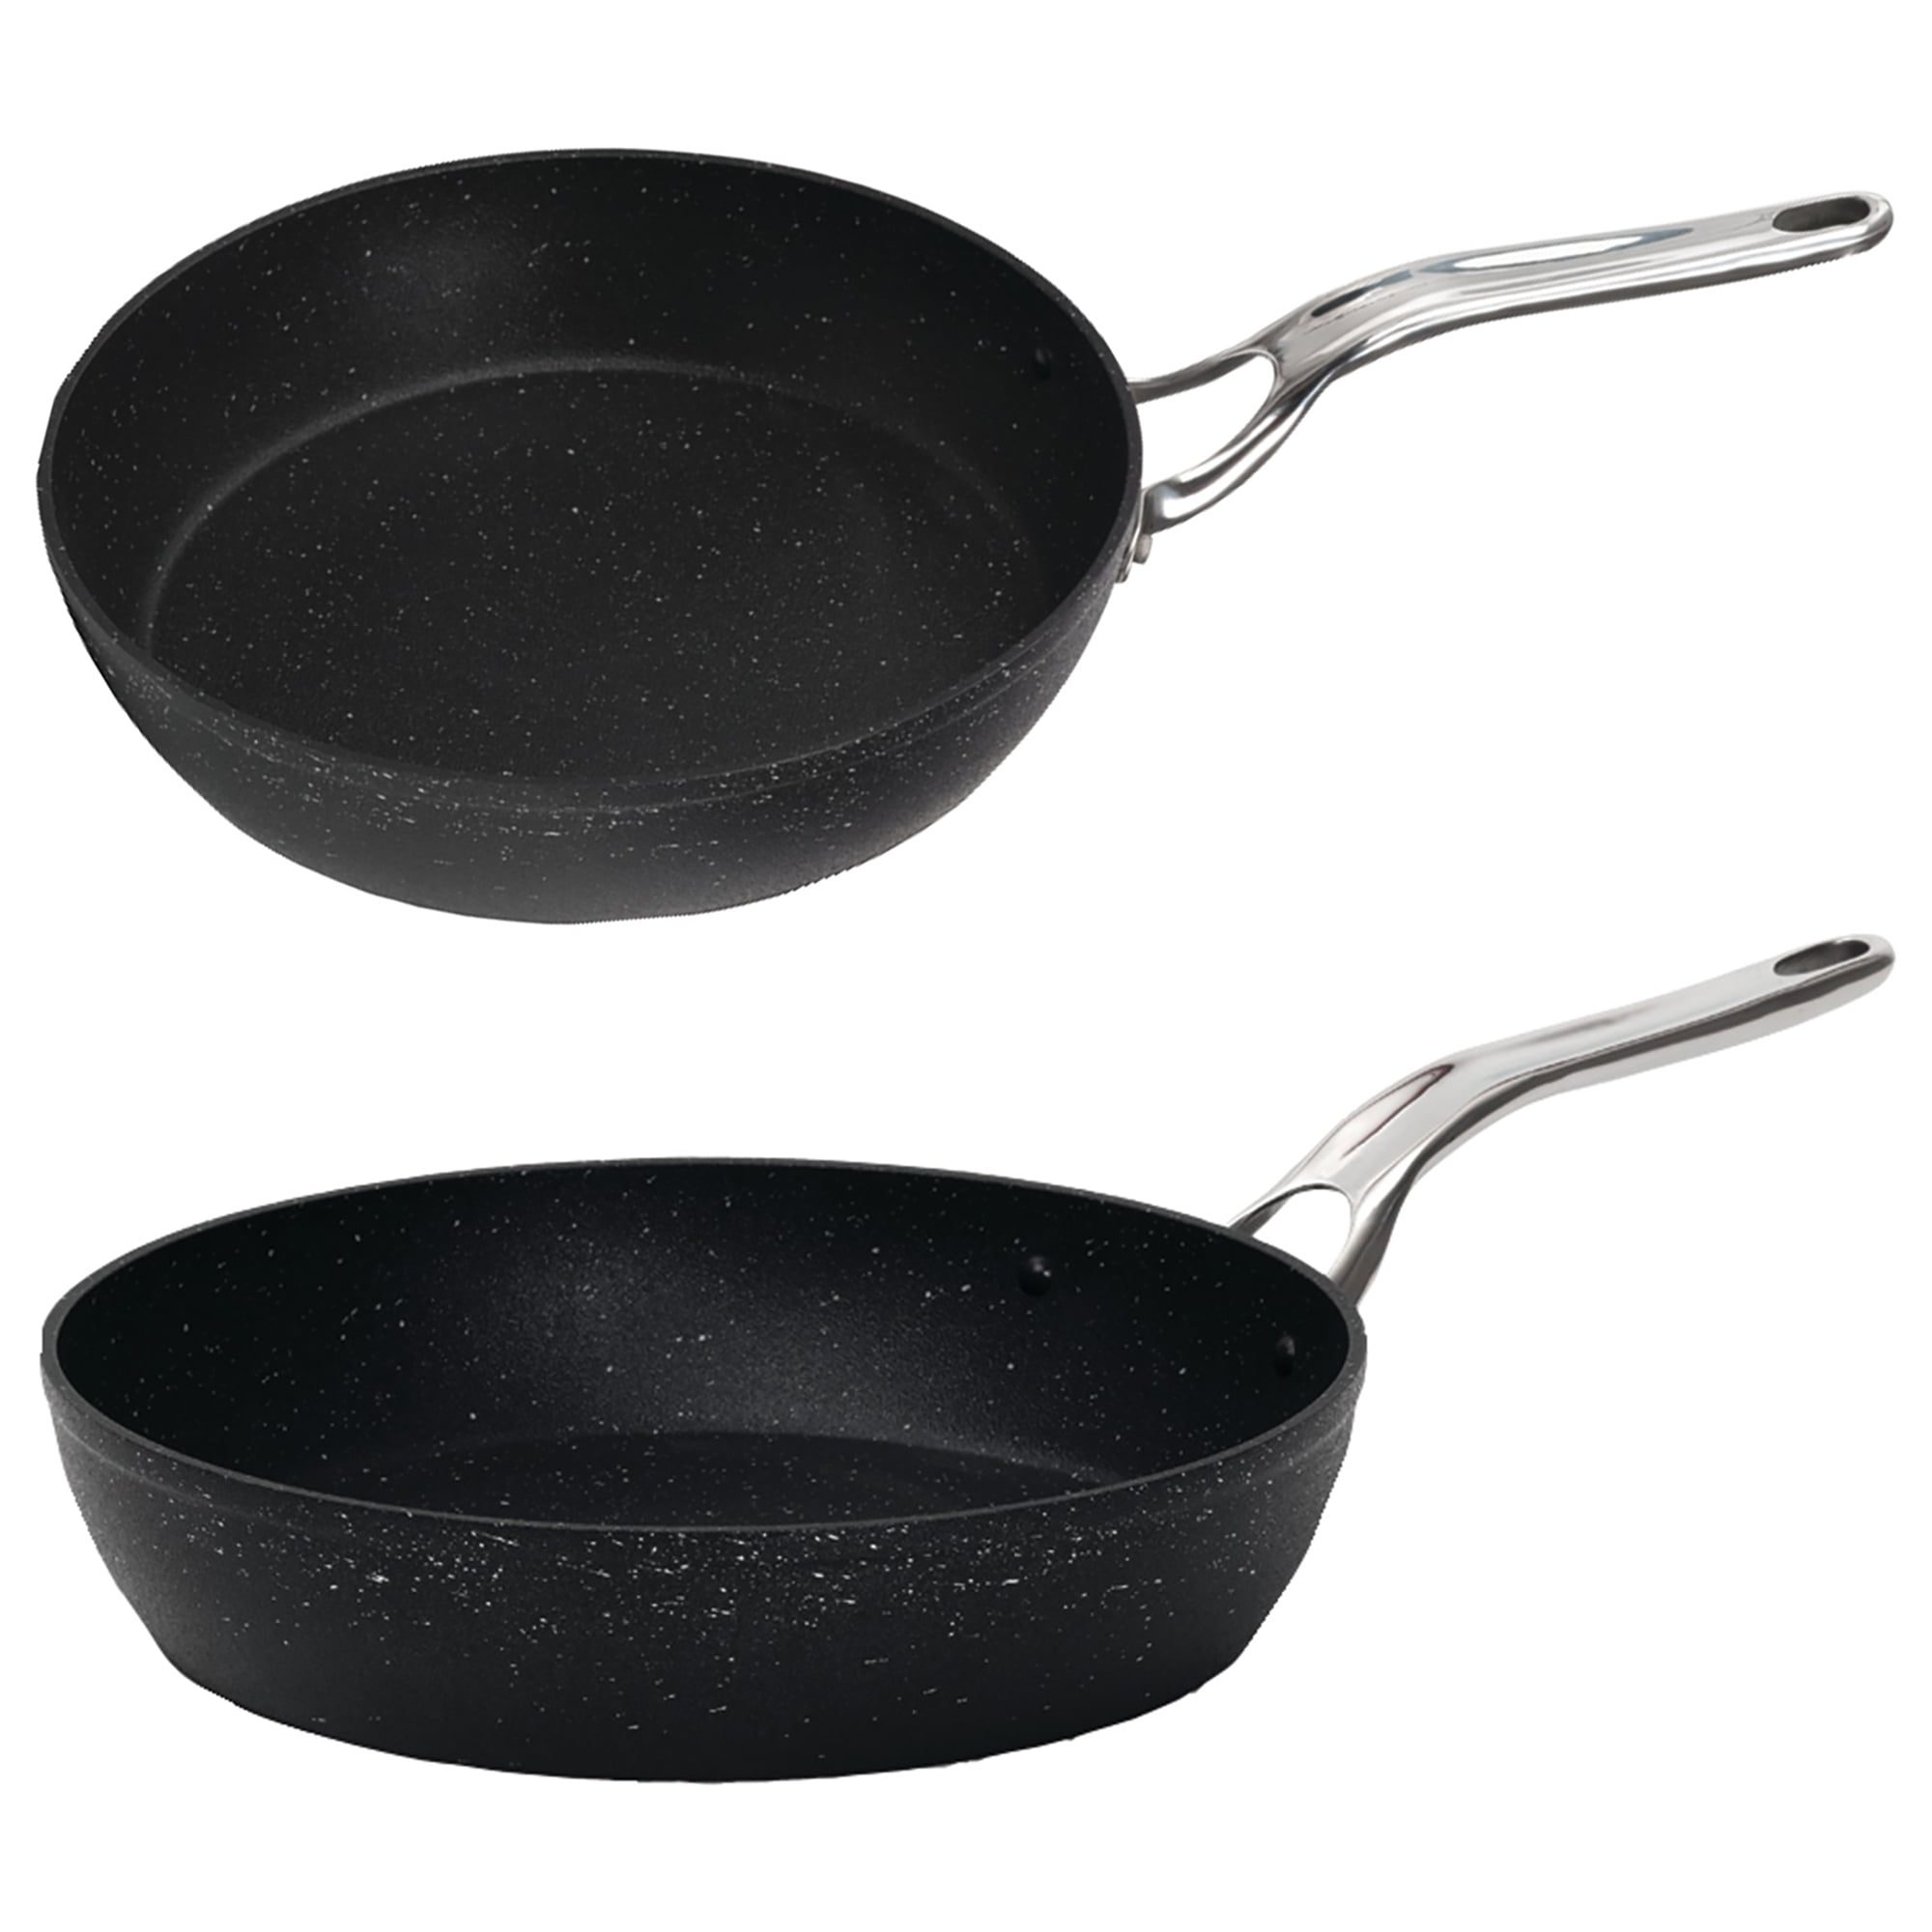  Starfrit The Rock Fry Pan With Bakelite Handle, 9.5-Inch  (SRFT030935): Home & Kitchen